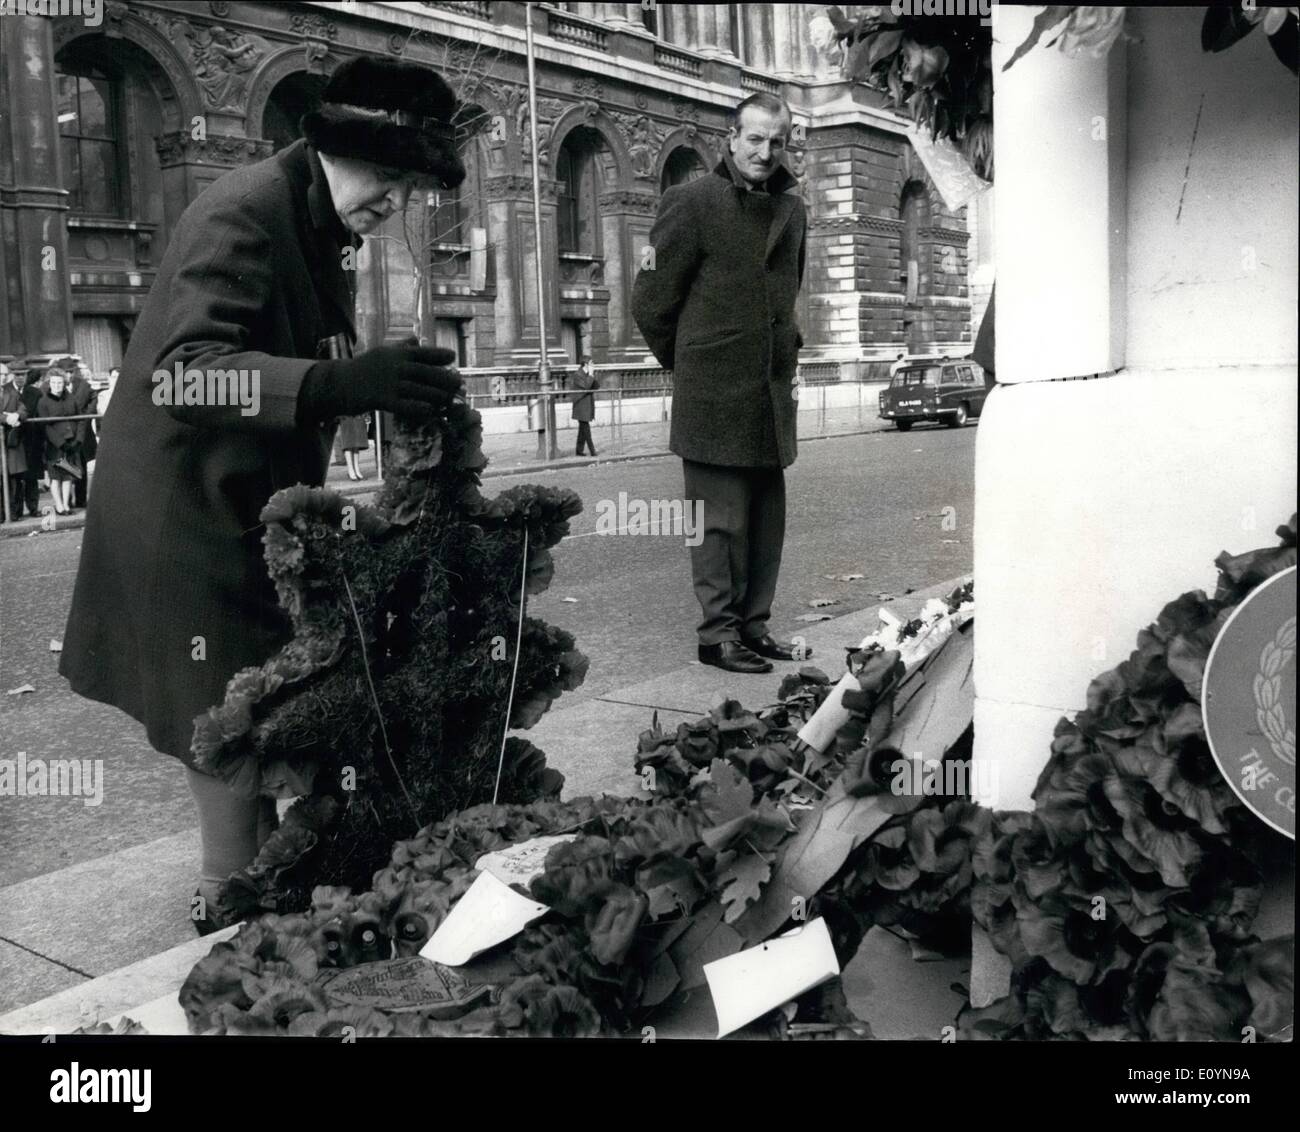 Nov. 11, 1970 - Cenotaph wreath in loving memory of Fred.: At 11 o'clock today, Fred Kemp, who went to glory on a Belgian battlefield 55 years ago, had his usual wreath laid on the Cenotaph by his widow, Louisia. ''The time for remembrance'', says Louisia Kemp, of Brixton, now in her 84th year, ''is the 11th hour of the 11th day of the 11th month''. And that was when she remembered her Grenndier Guardman who went out of her life in 1915. In a sense, Louisia Kemp has never stopped looking after Fred Stock Photo